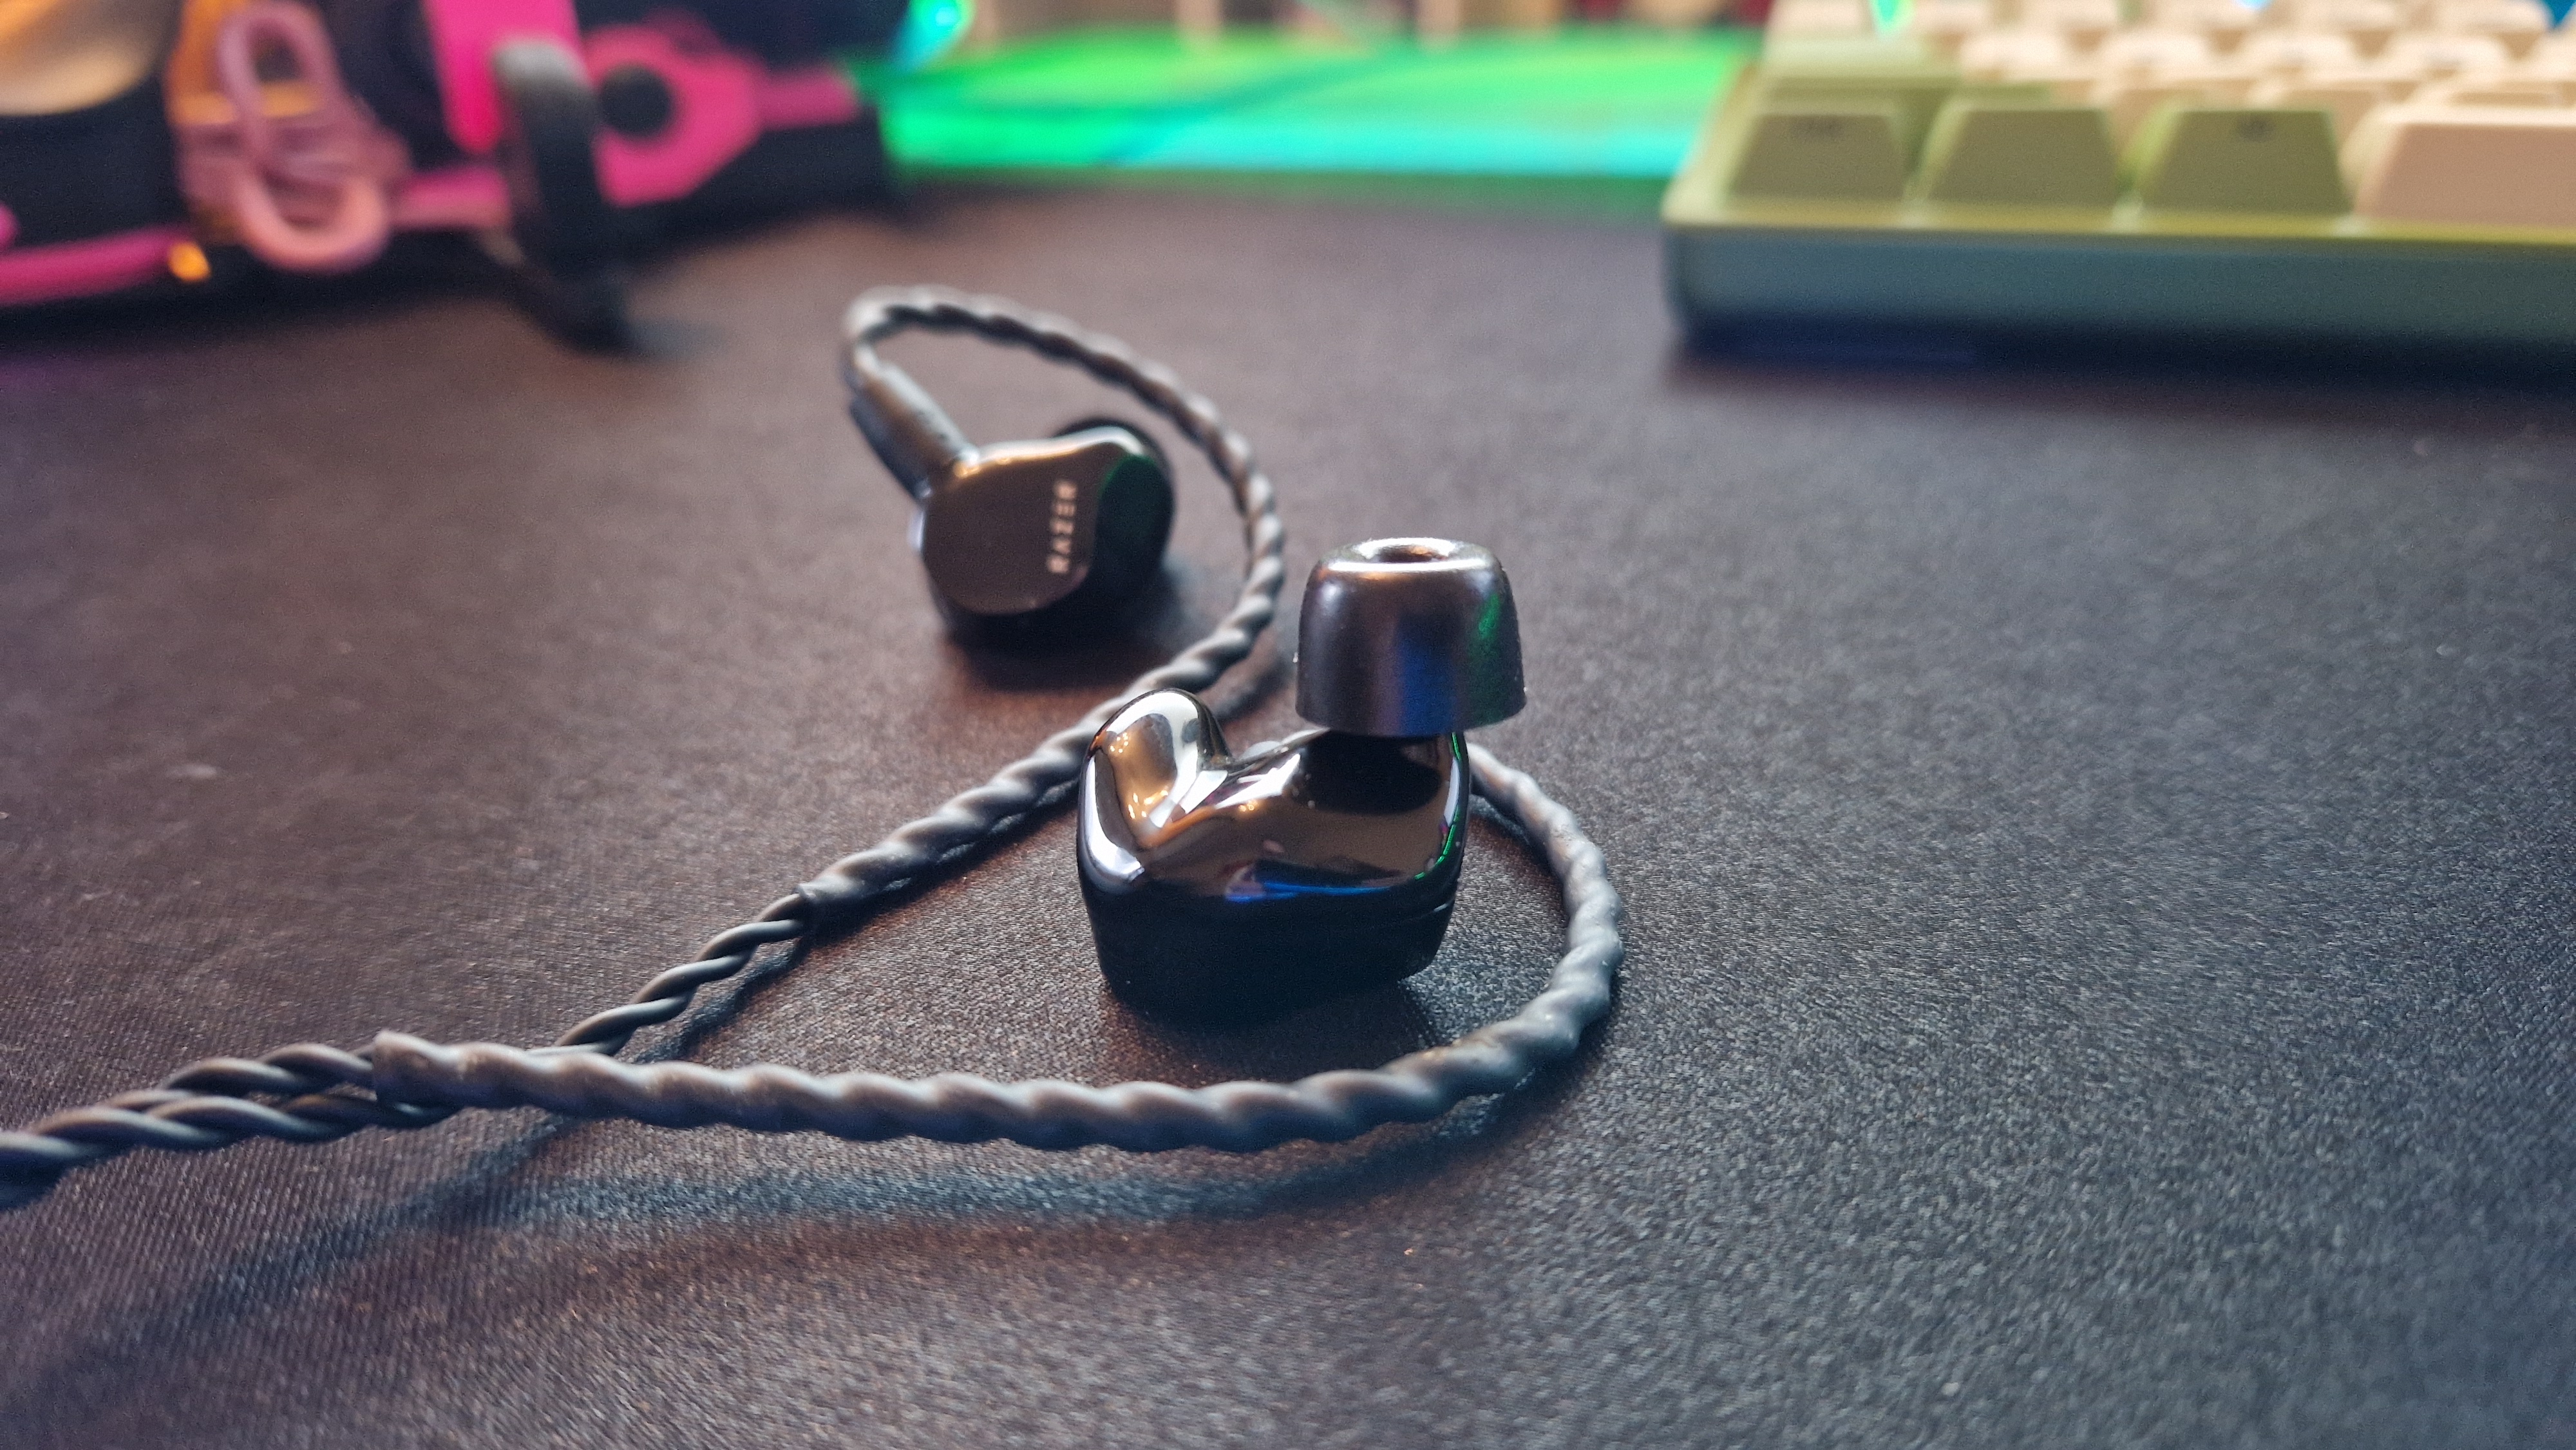 I use Razer’s in-ear gaming monitors every day, and they’re now cheaper than ever